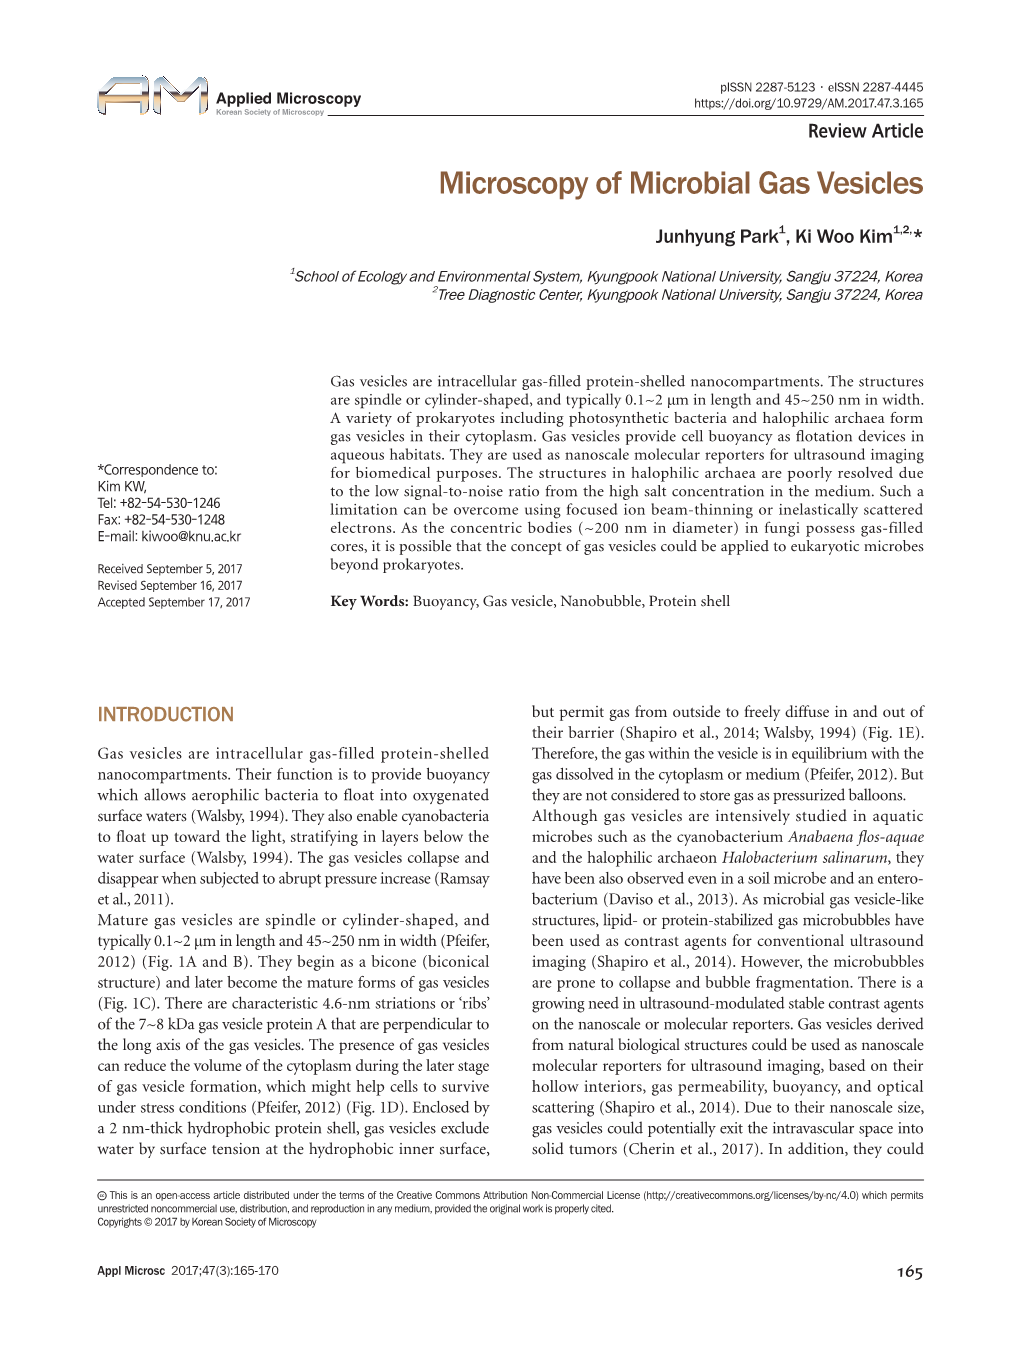 Microscopy of Microbial Gas Vesicles